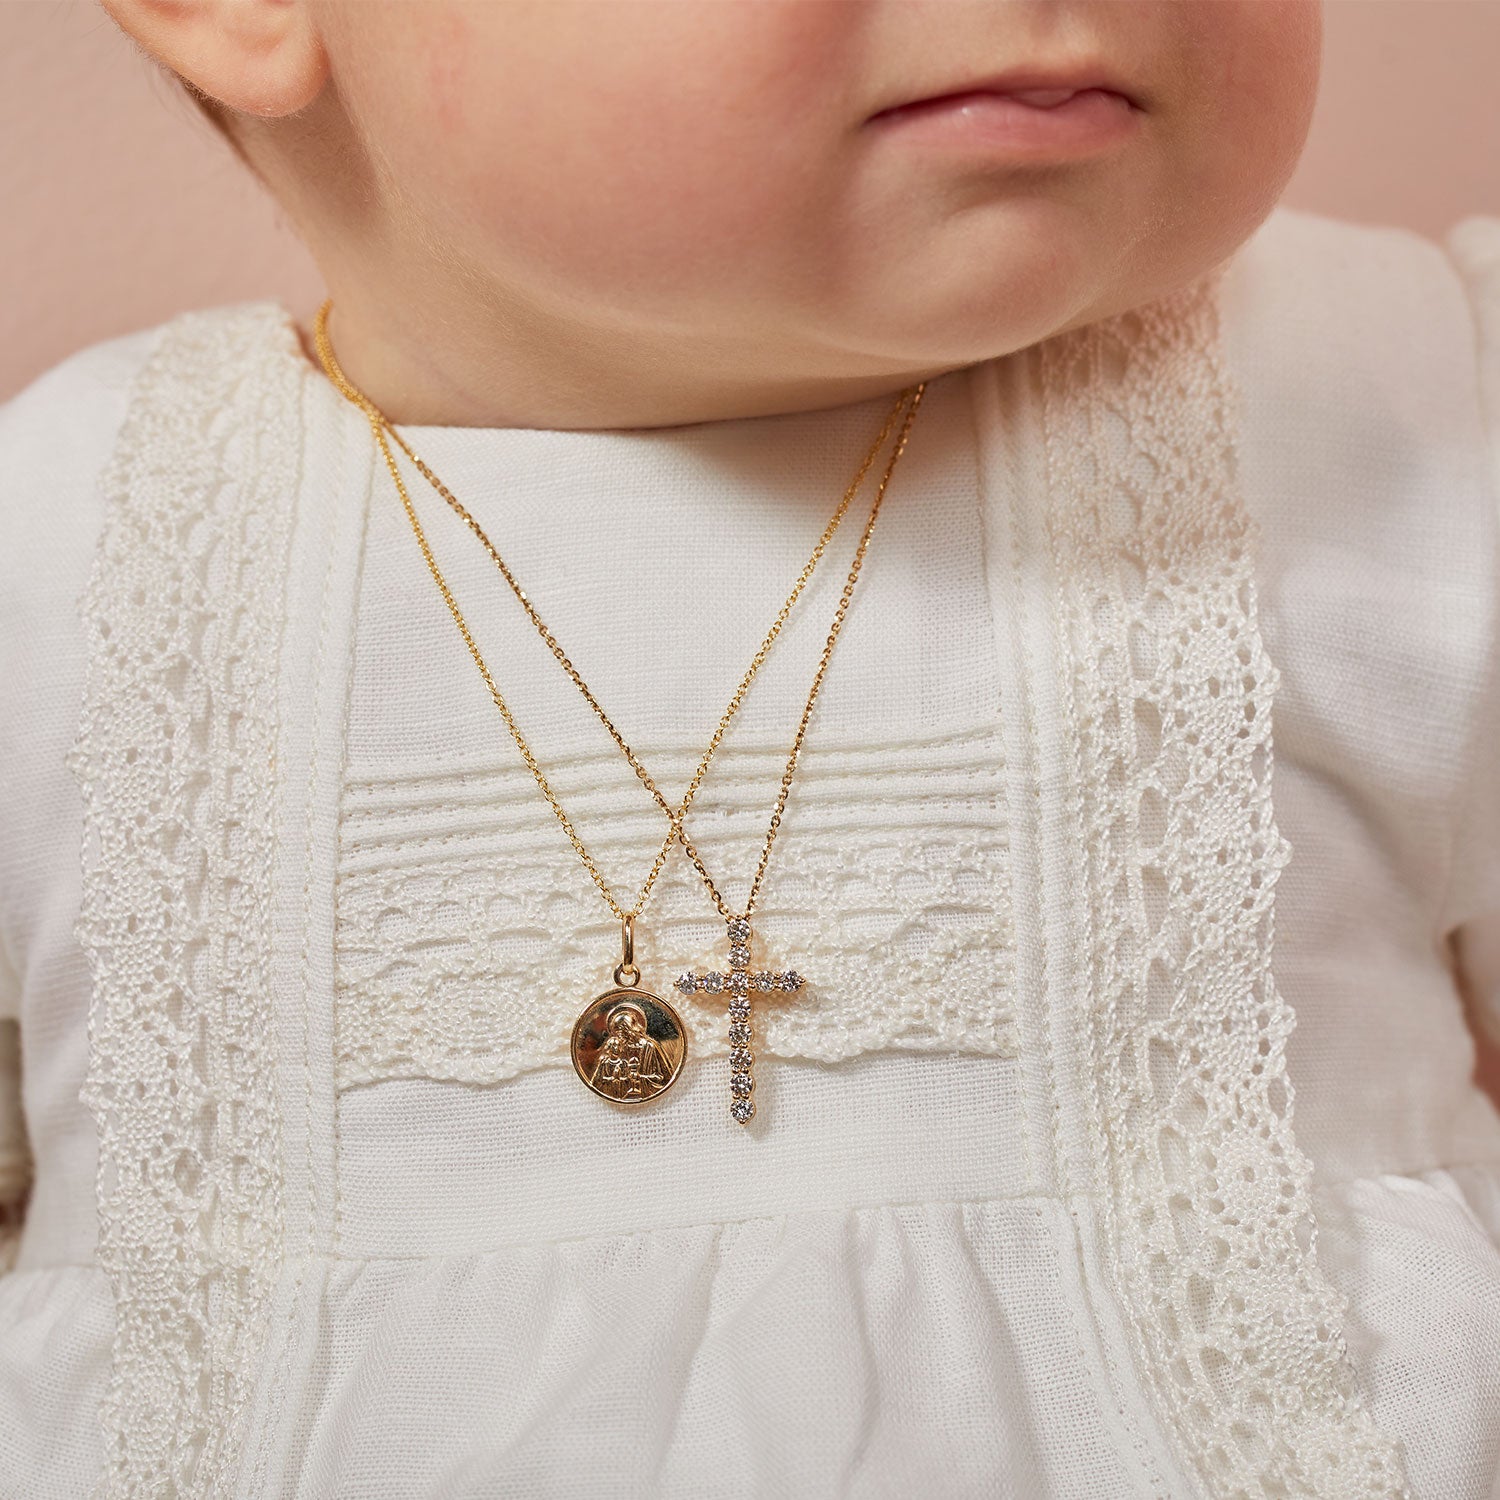 Boy Girl Gold Charm Necklace, 3 4 5 6 Kids 14k Solid Gold Charms, Mothers  Necklace Engraved Children Charms, Personalized Family Charms. - Etsy